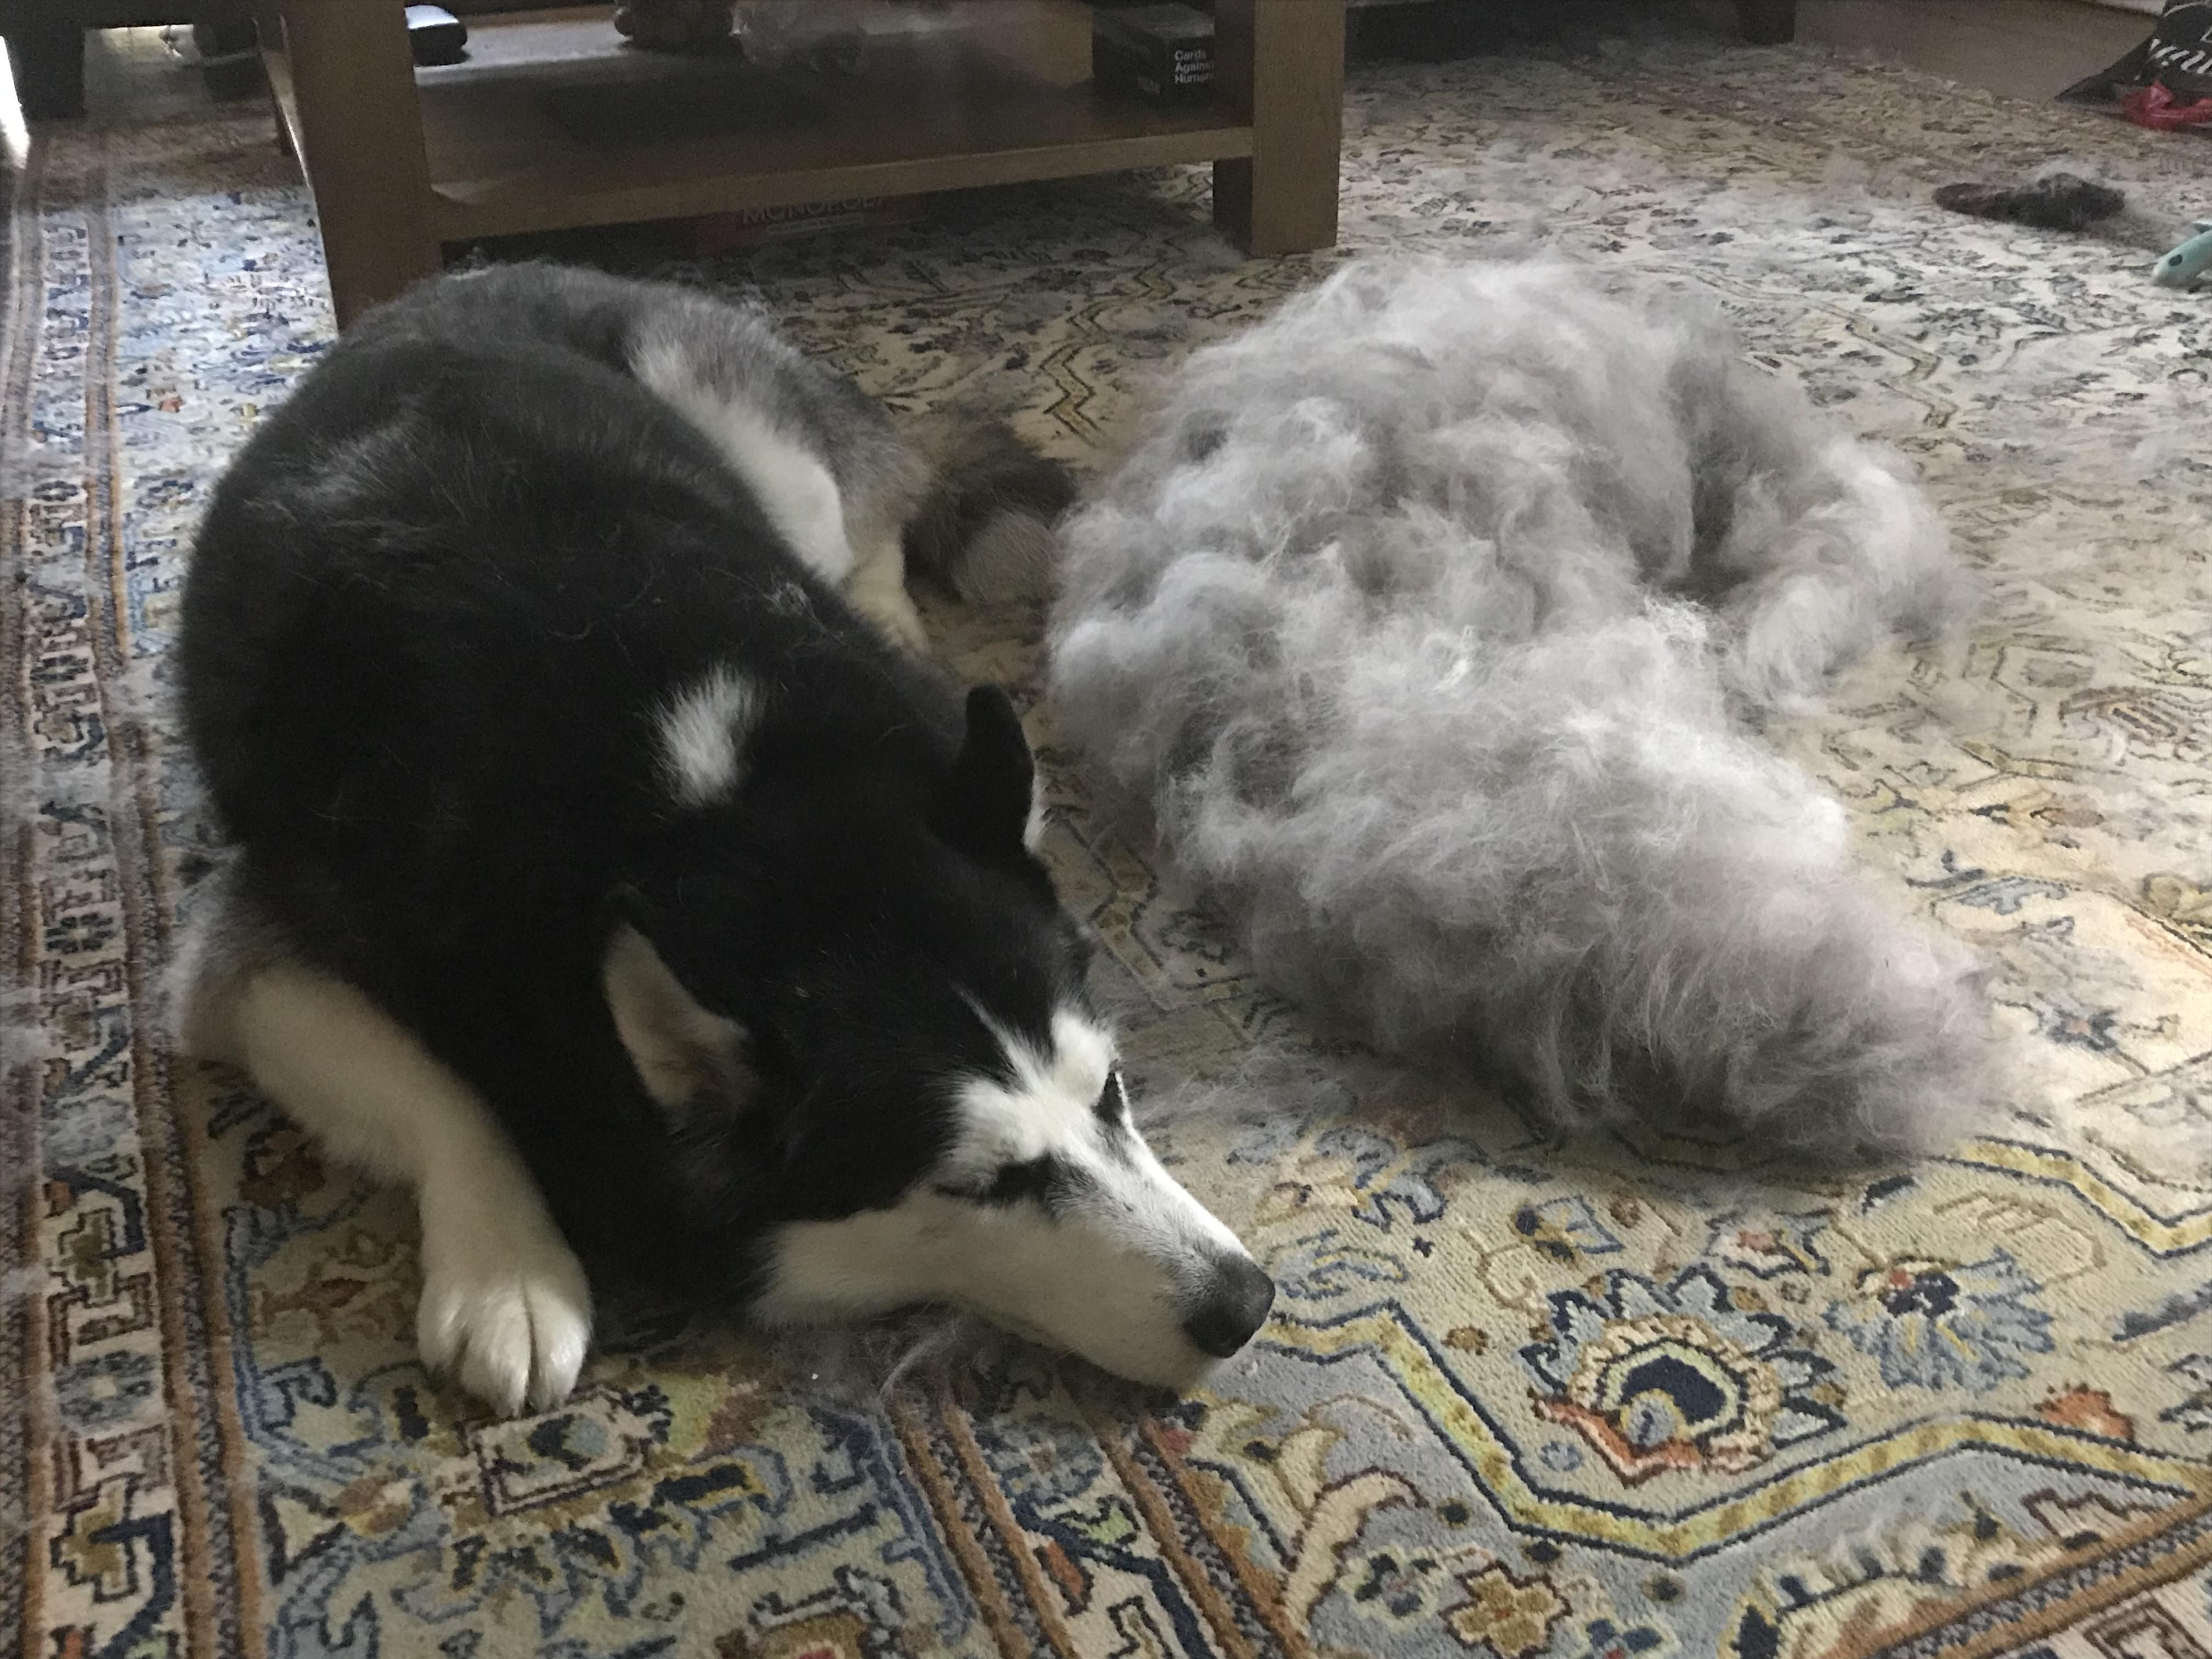 I brushed my husky and made another